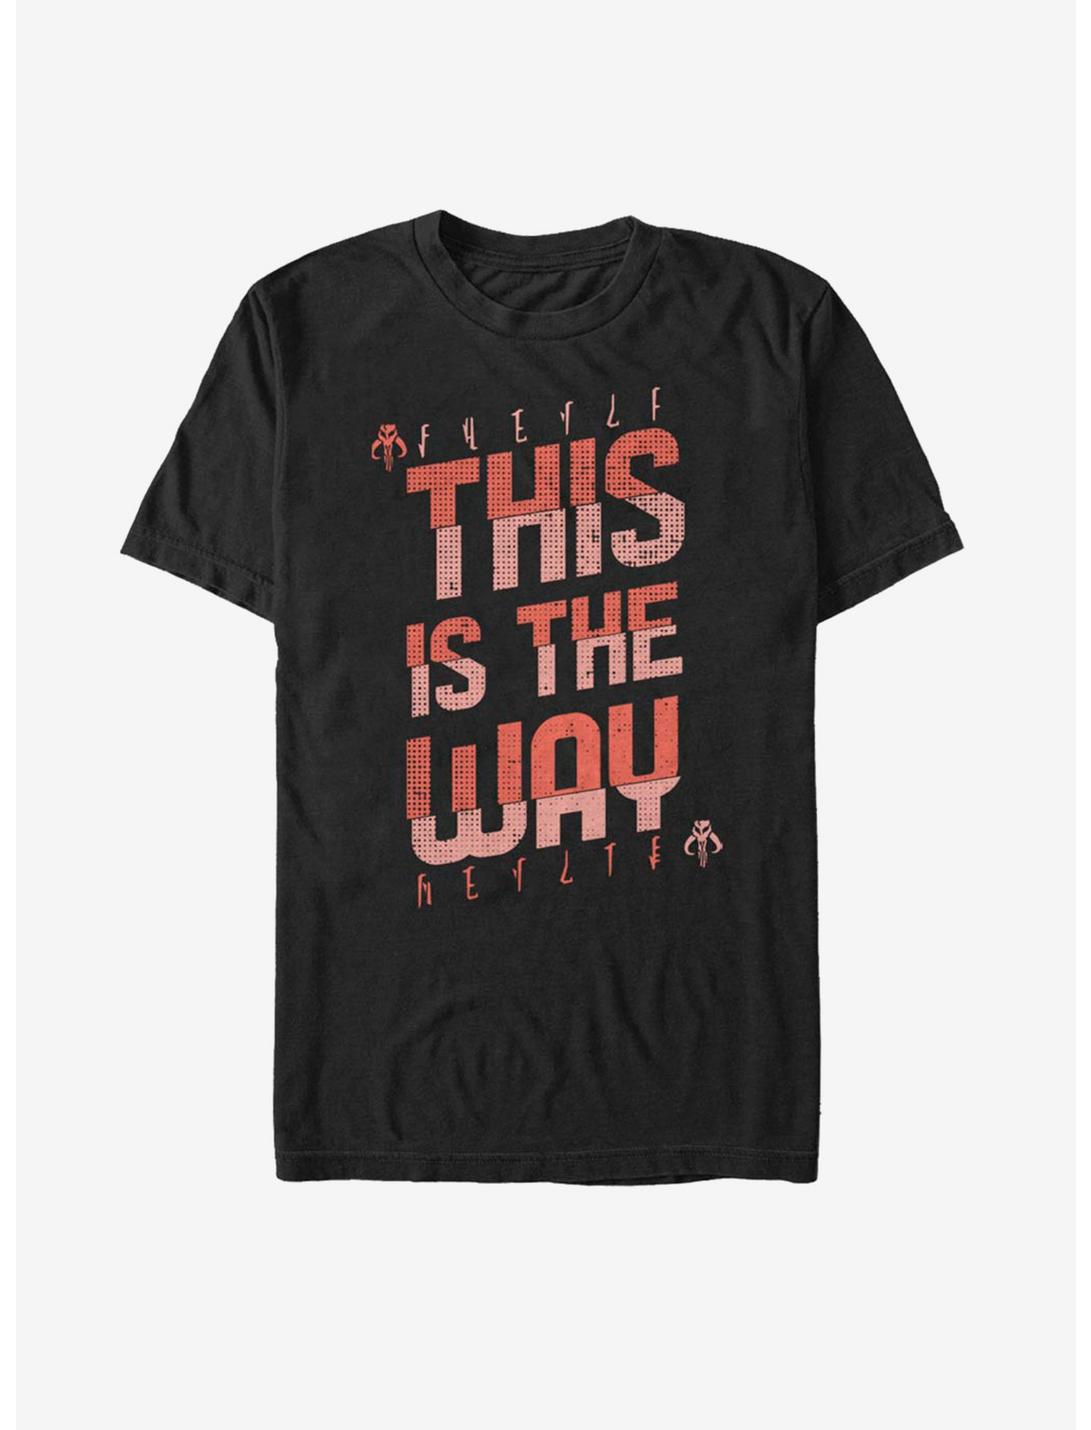 Star Wars The Mandalorian This Is The Way Red Script T-Shirt, BLACK, hi-res